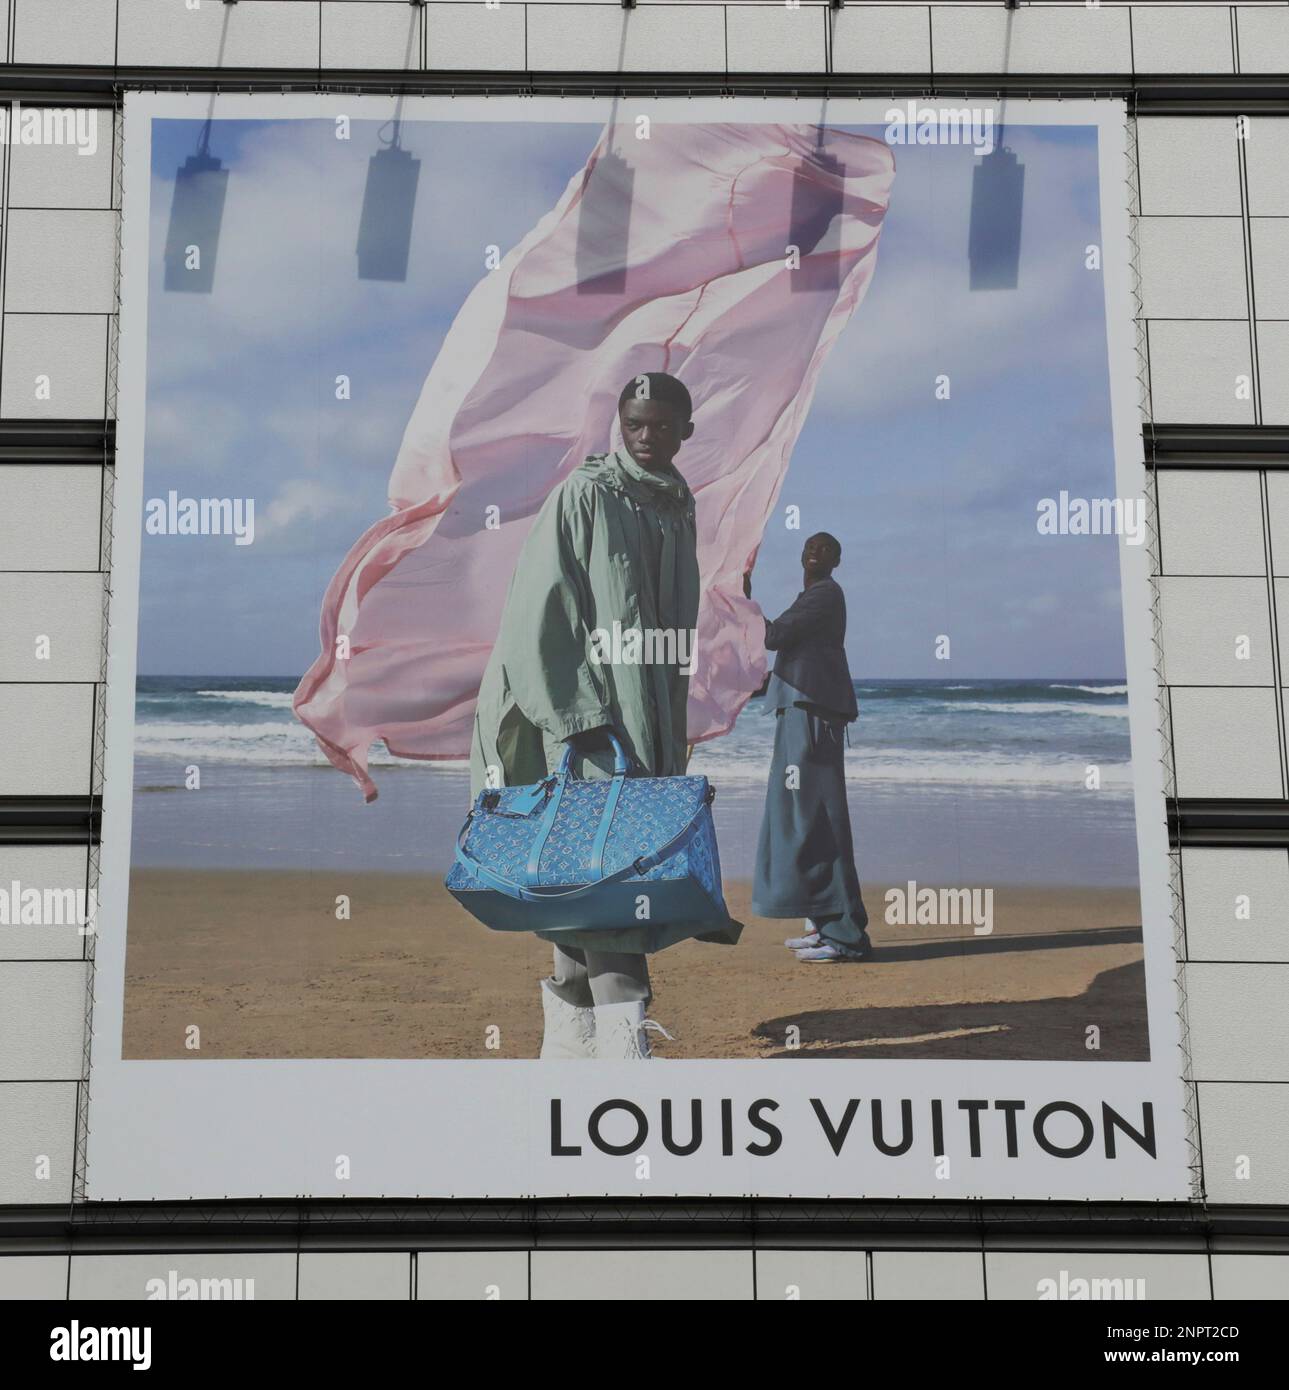 Luxury fashion house Louis Vuitton has introduced a new product